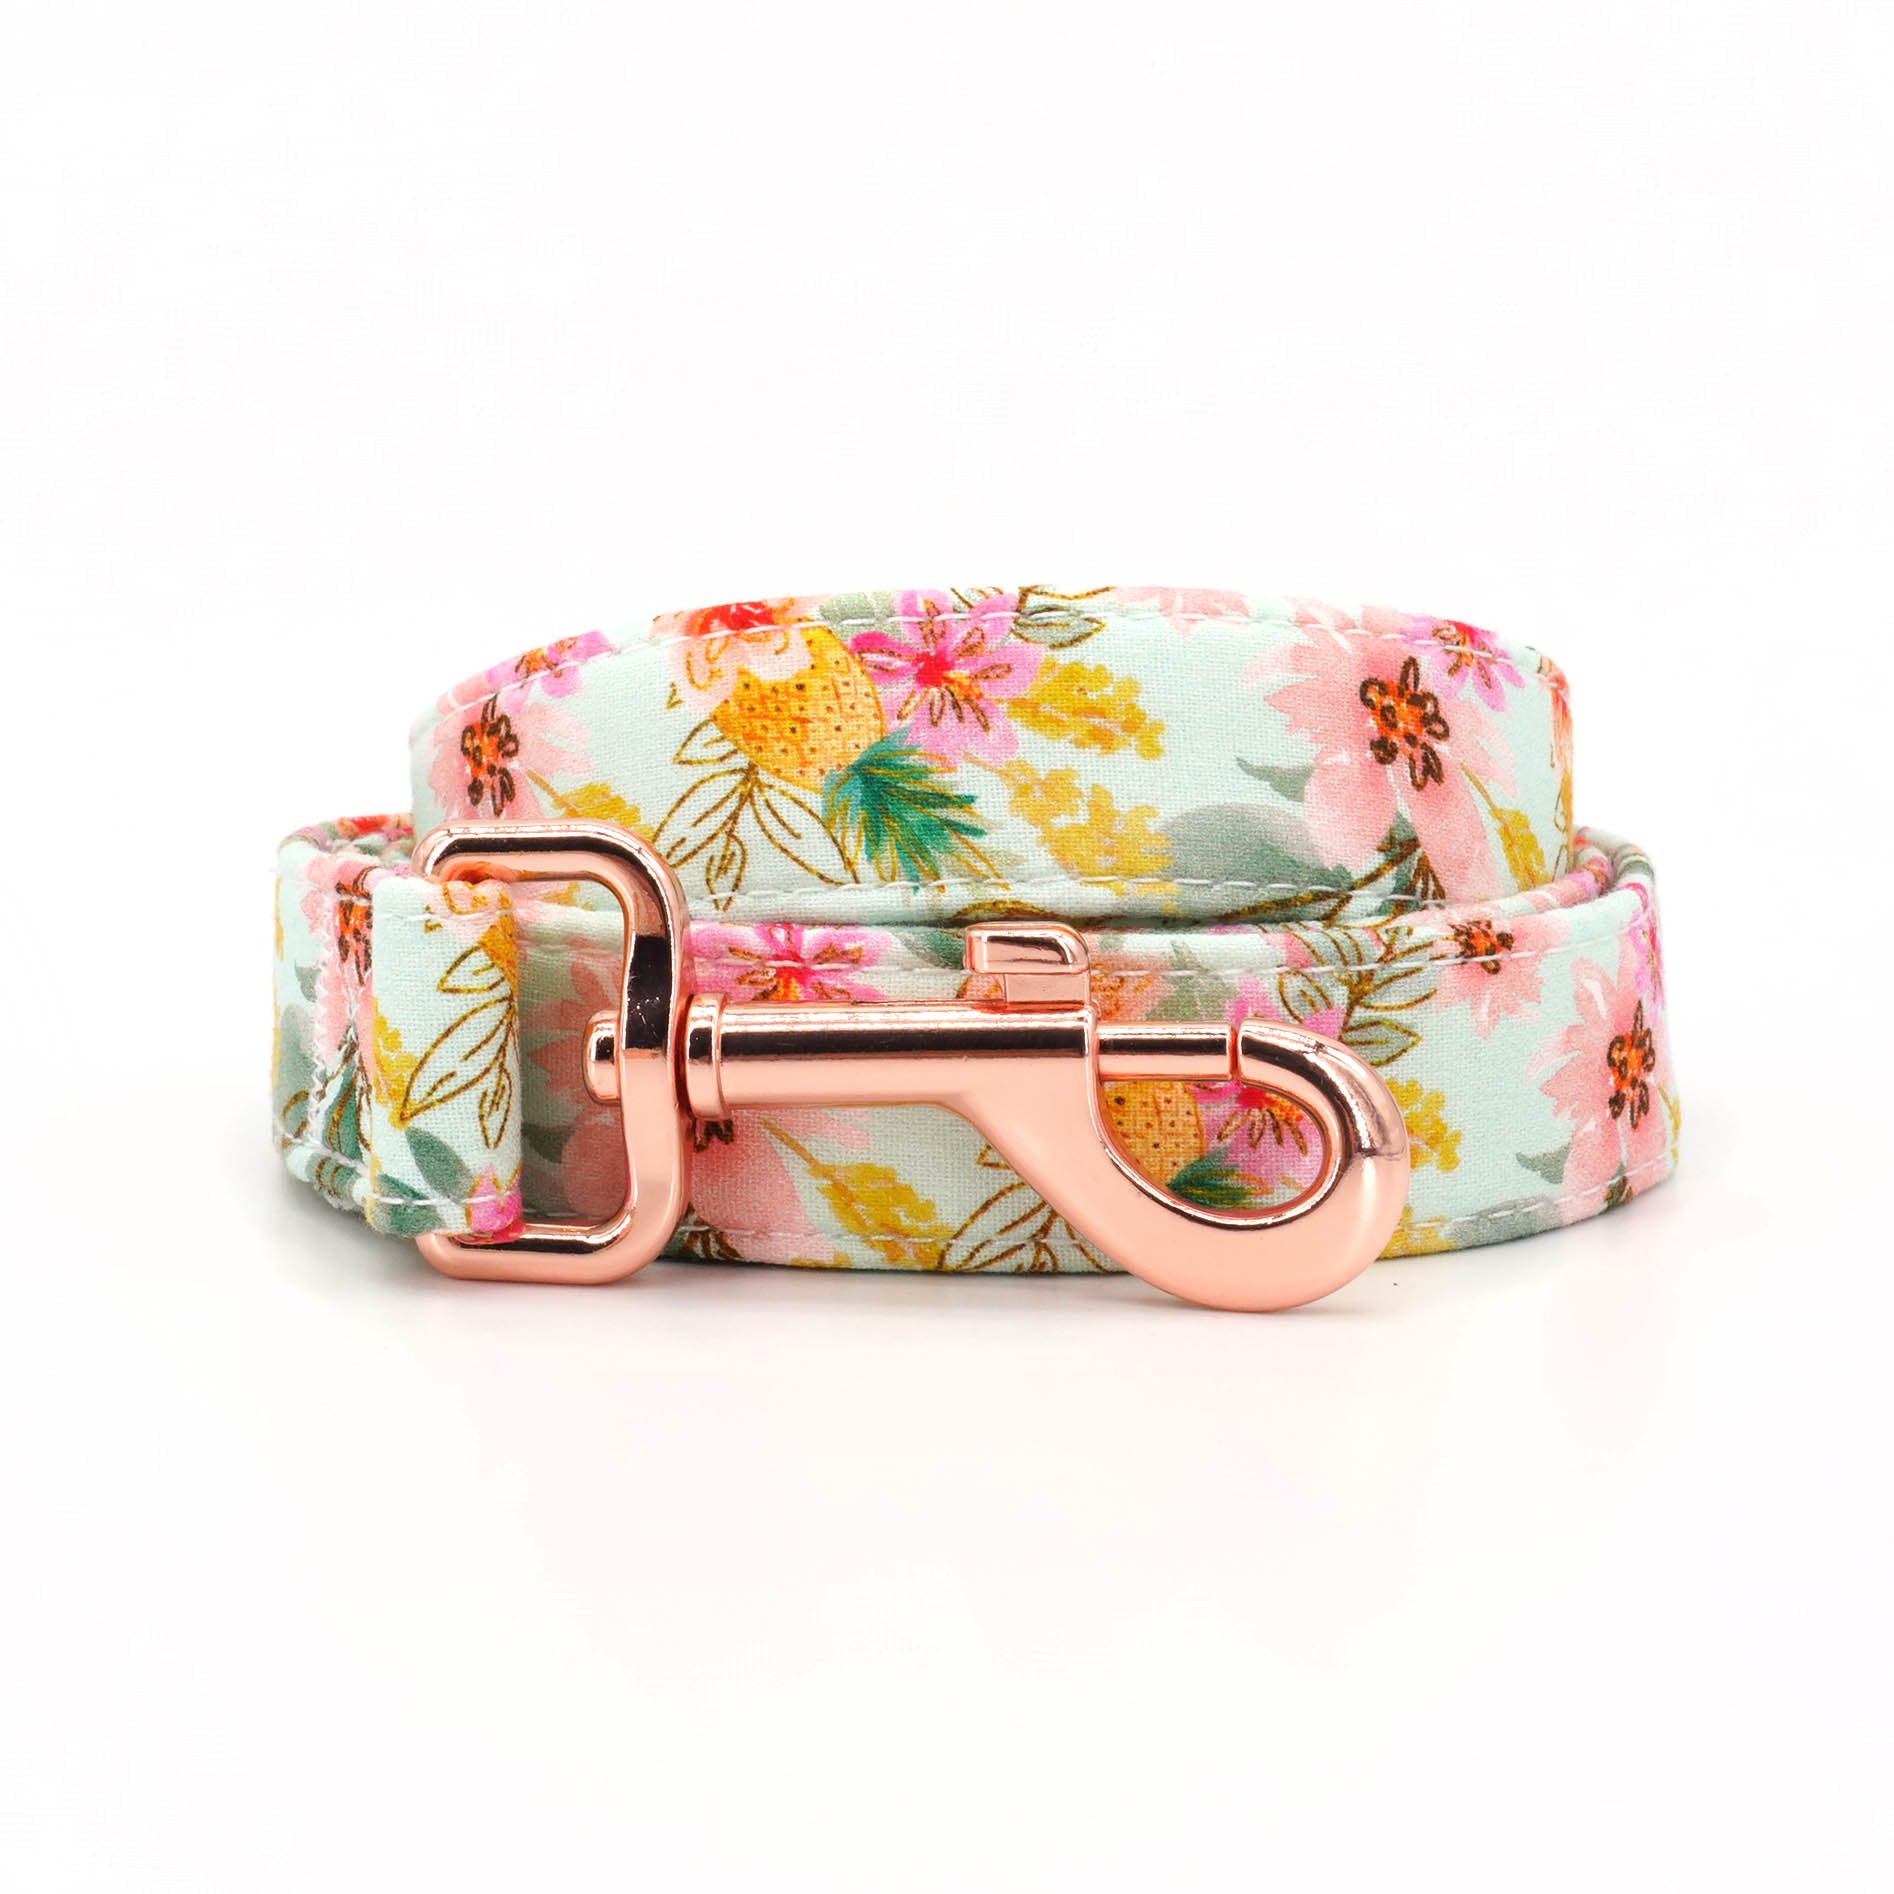 Flowers And Pineapple: Personalized Collars And Leash